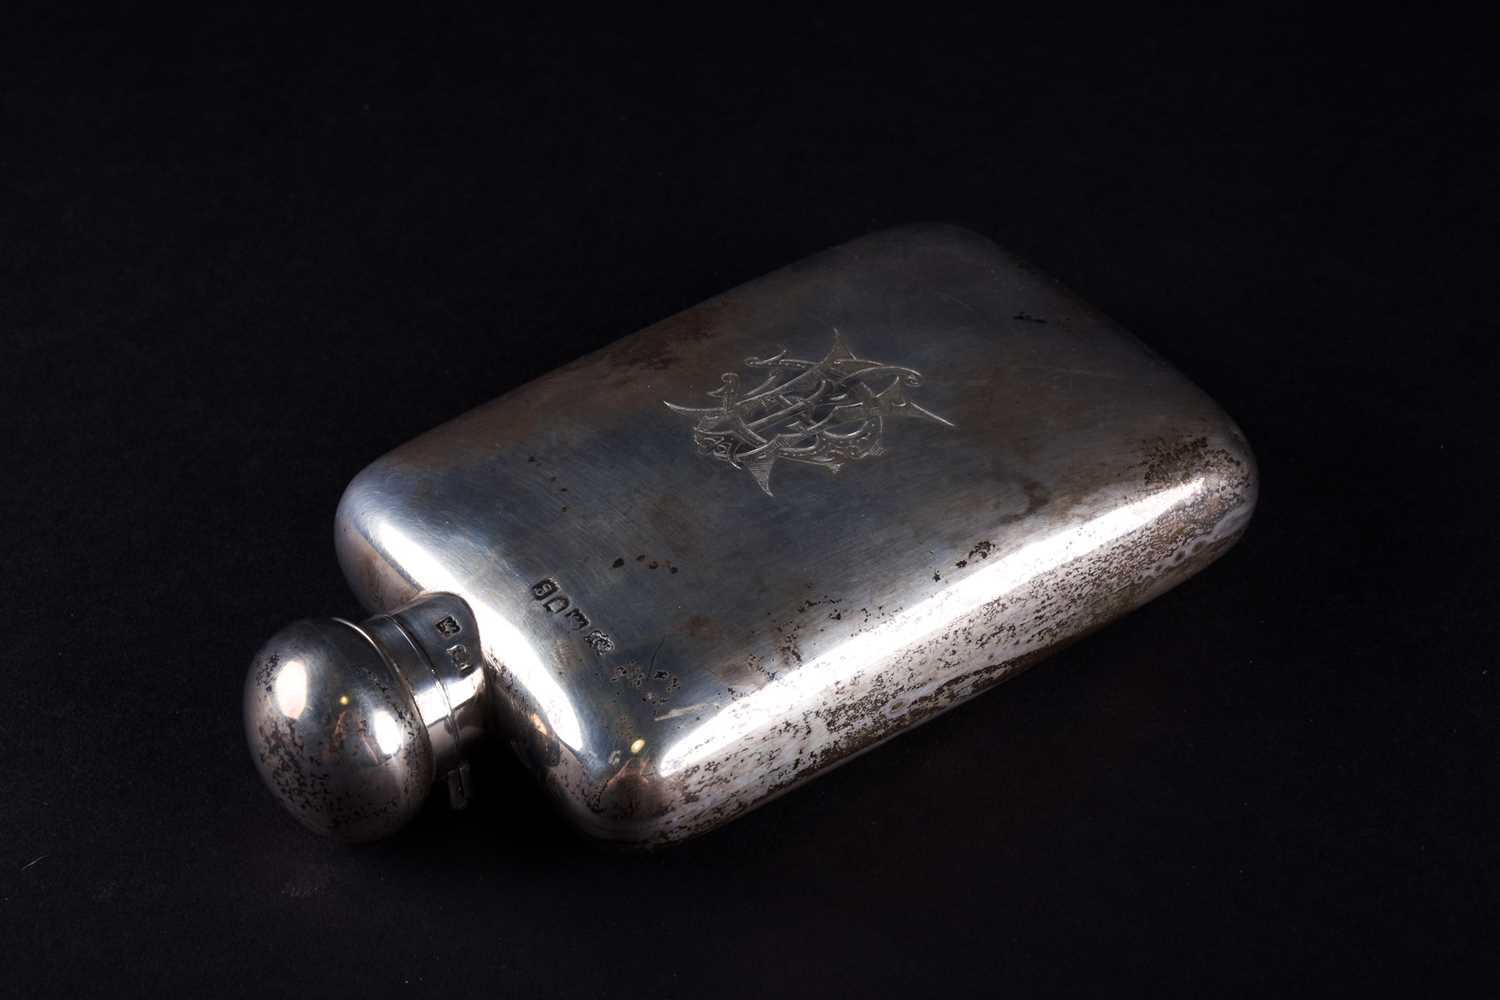 An Edwardian silver hip flask, Robert Pringle & Sons, London 1902, engraved with monogram IEH, 170g, - Image 3 of 6